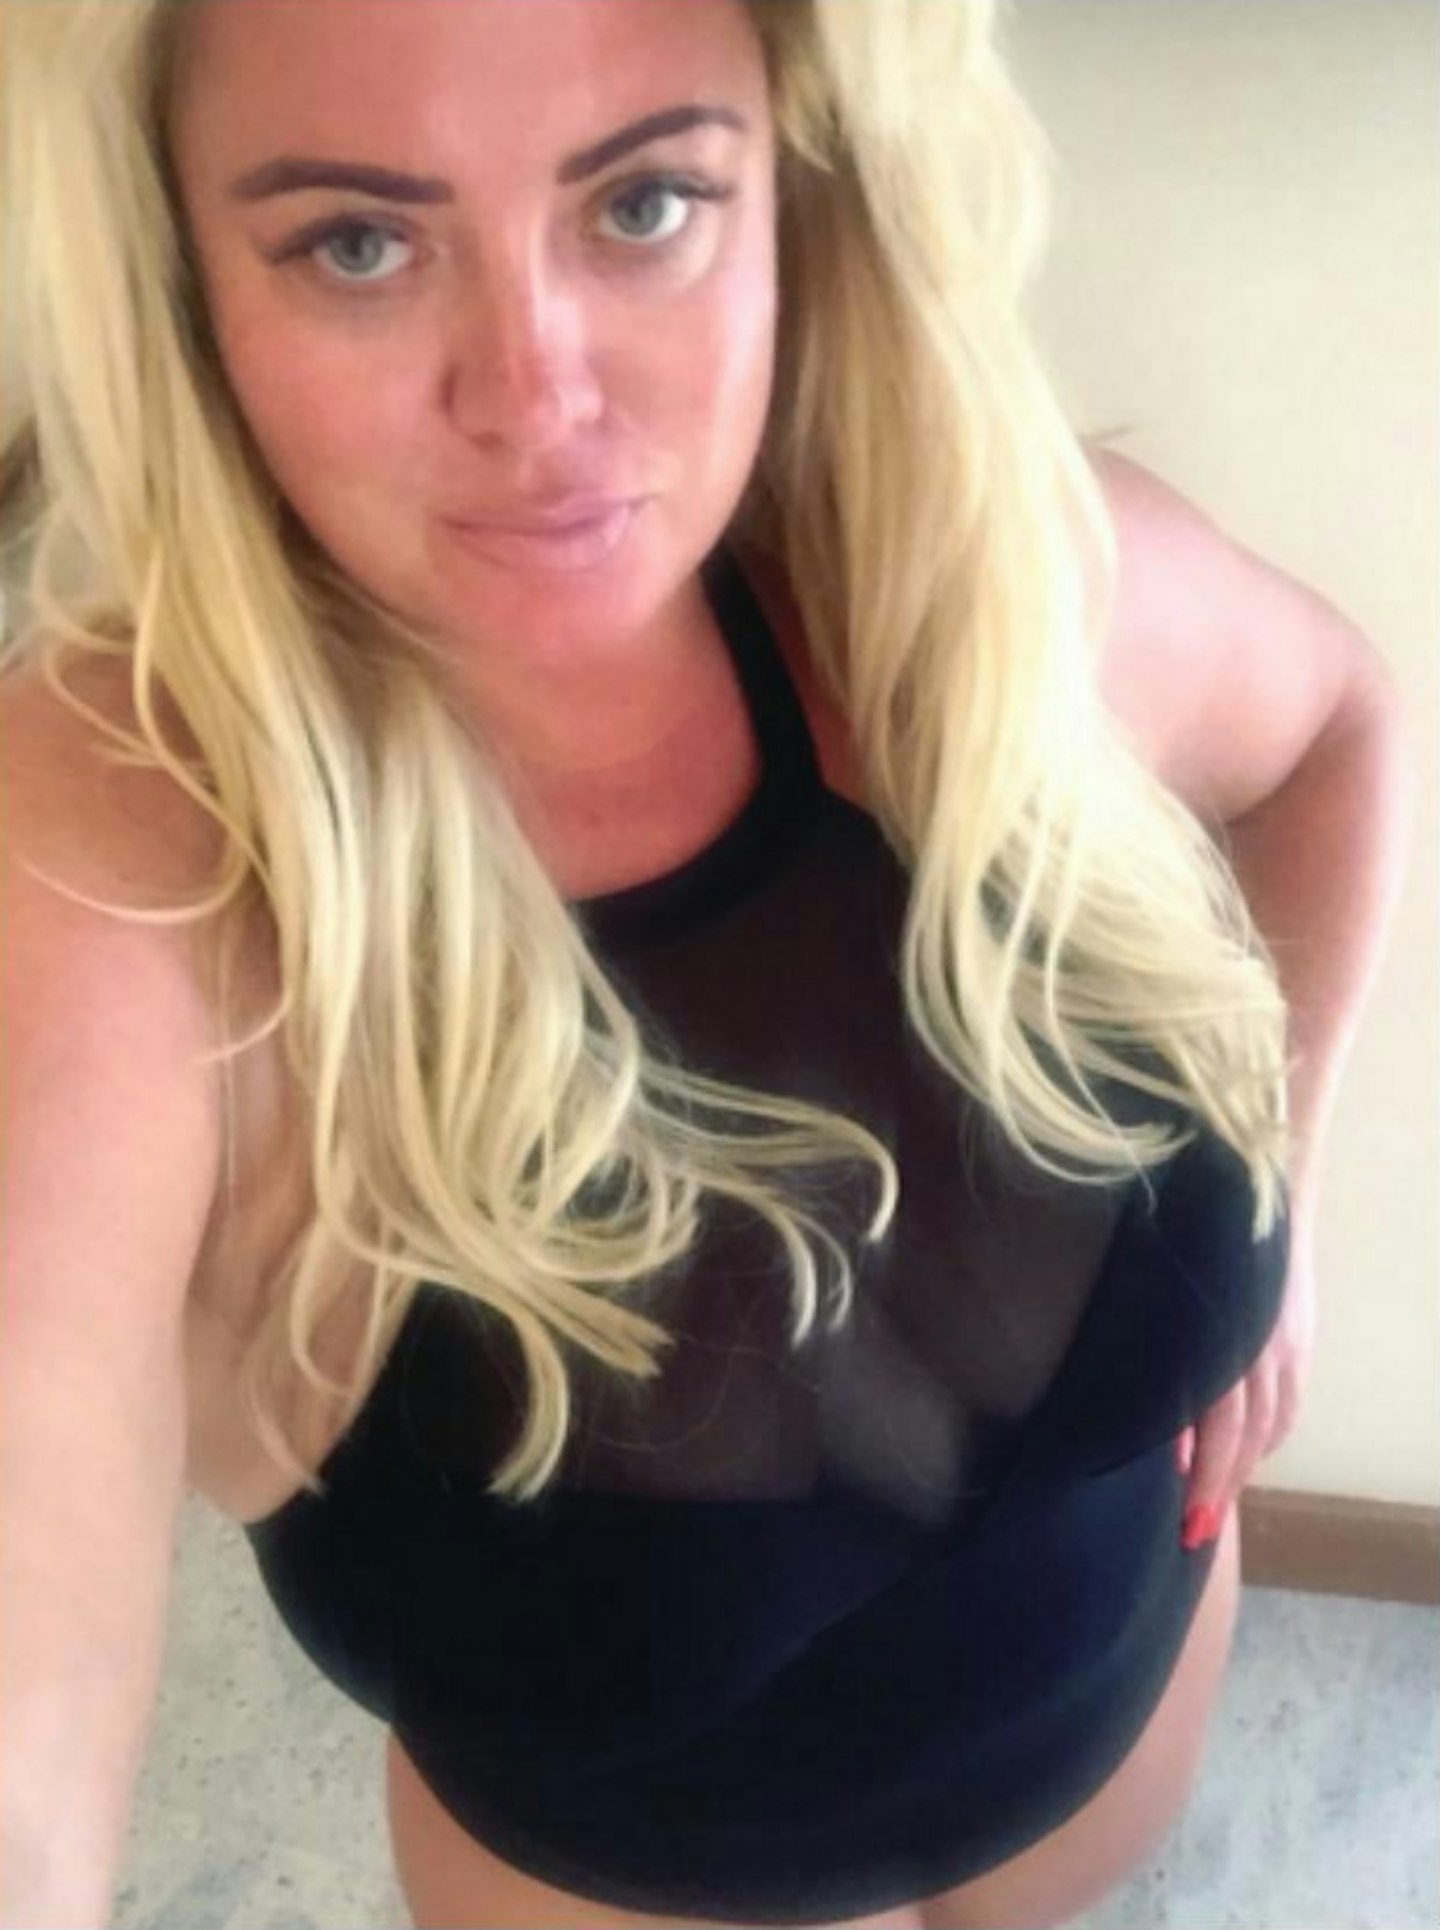 gemma collins weight loss may 2016 before after swimsuit portrait